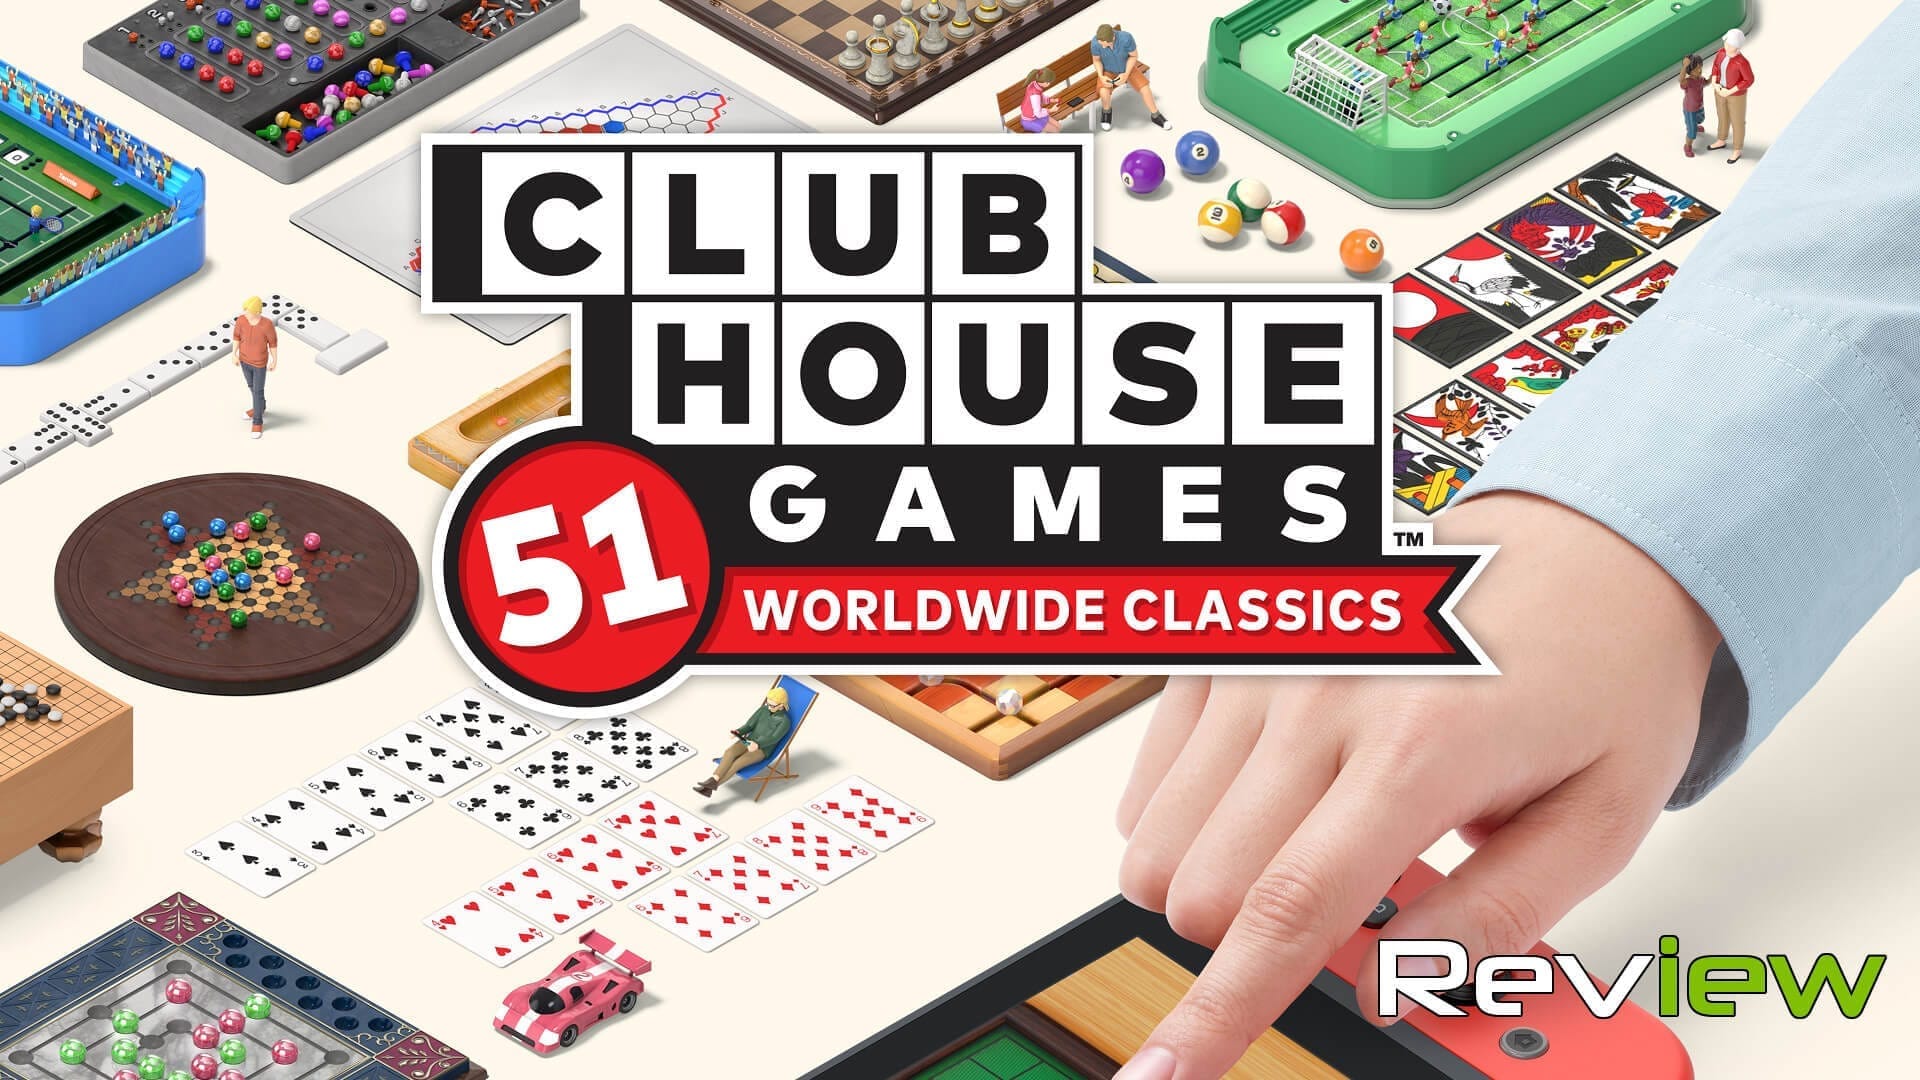 Clubhouse Games: 51 Worldwide Classics - review - Demon Gaming